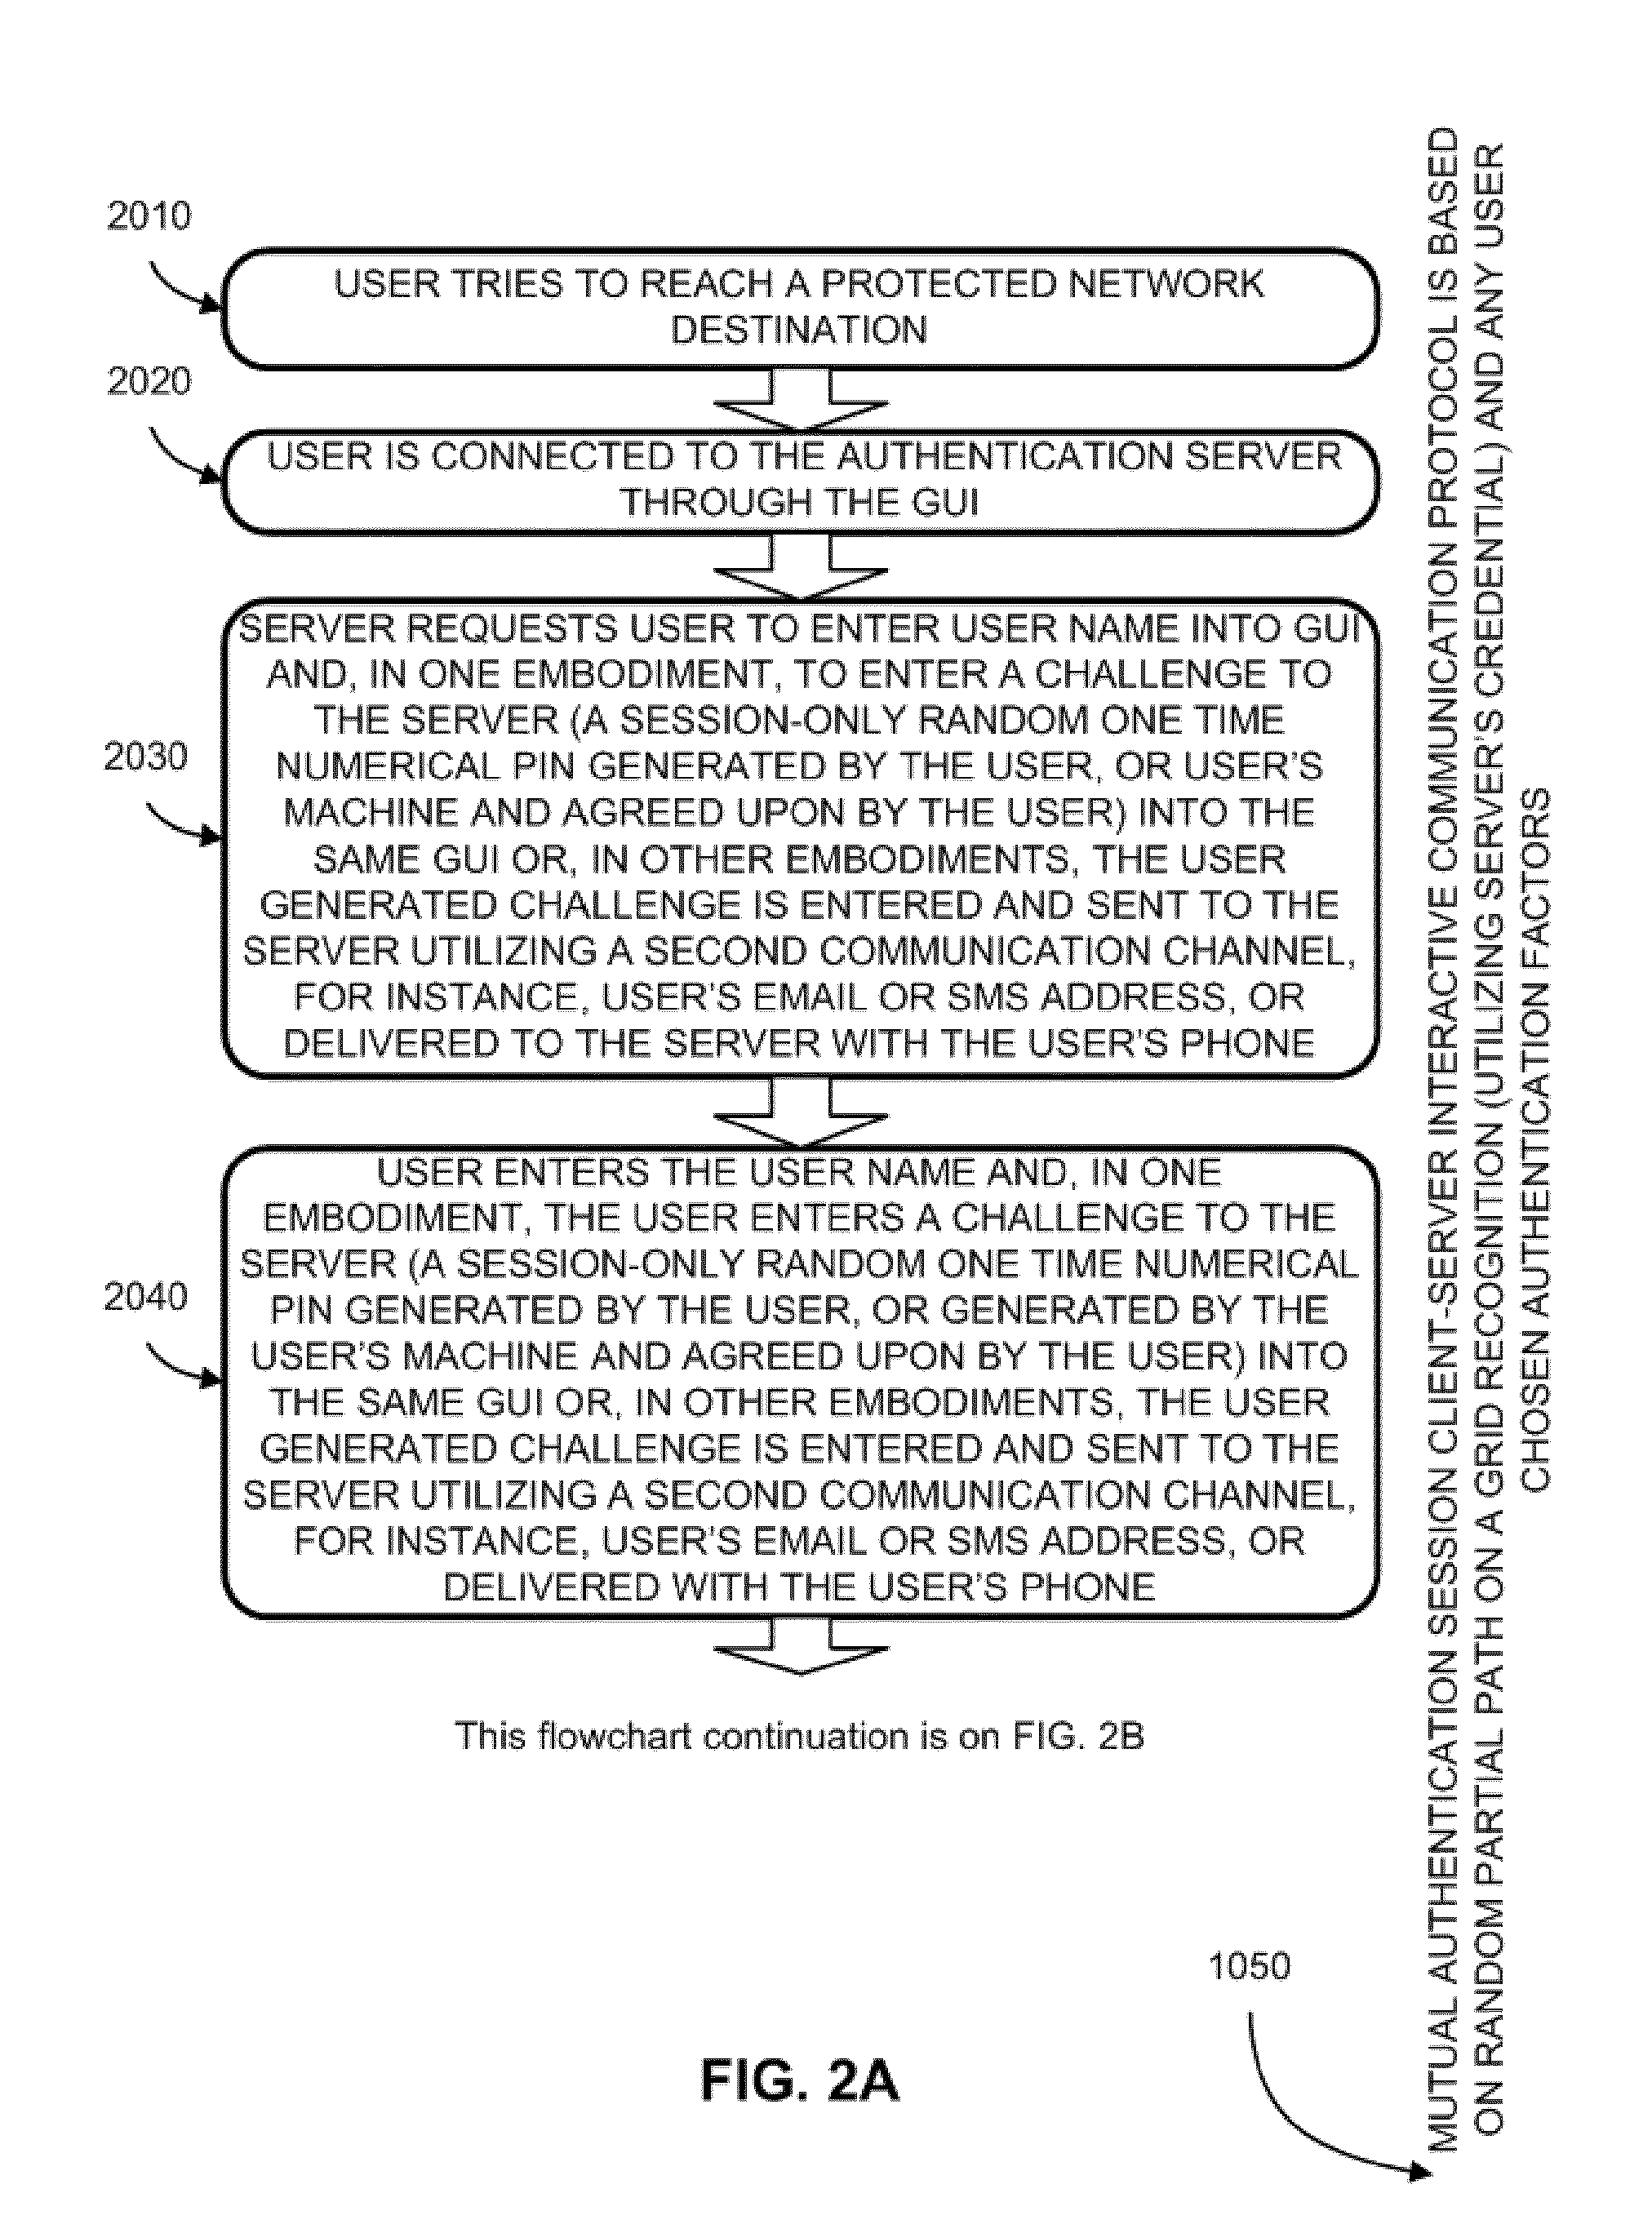 System and method for in- and out-of-band multi-factor server-to-user authentication